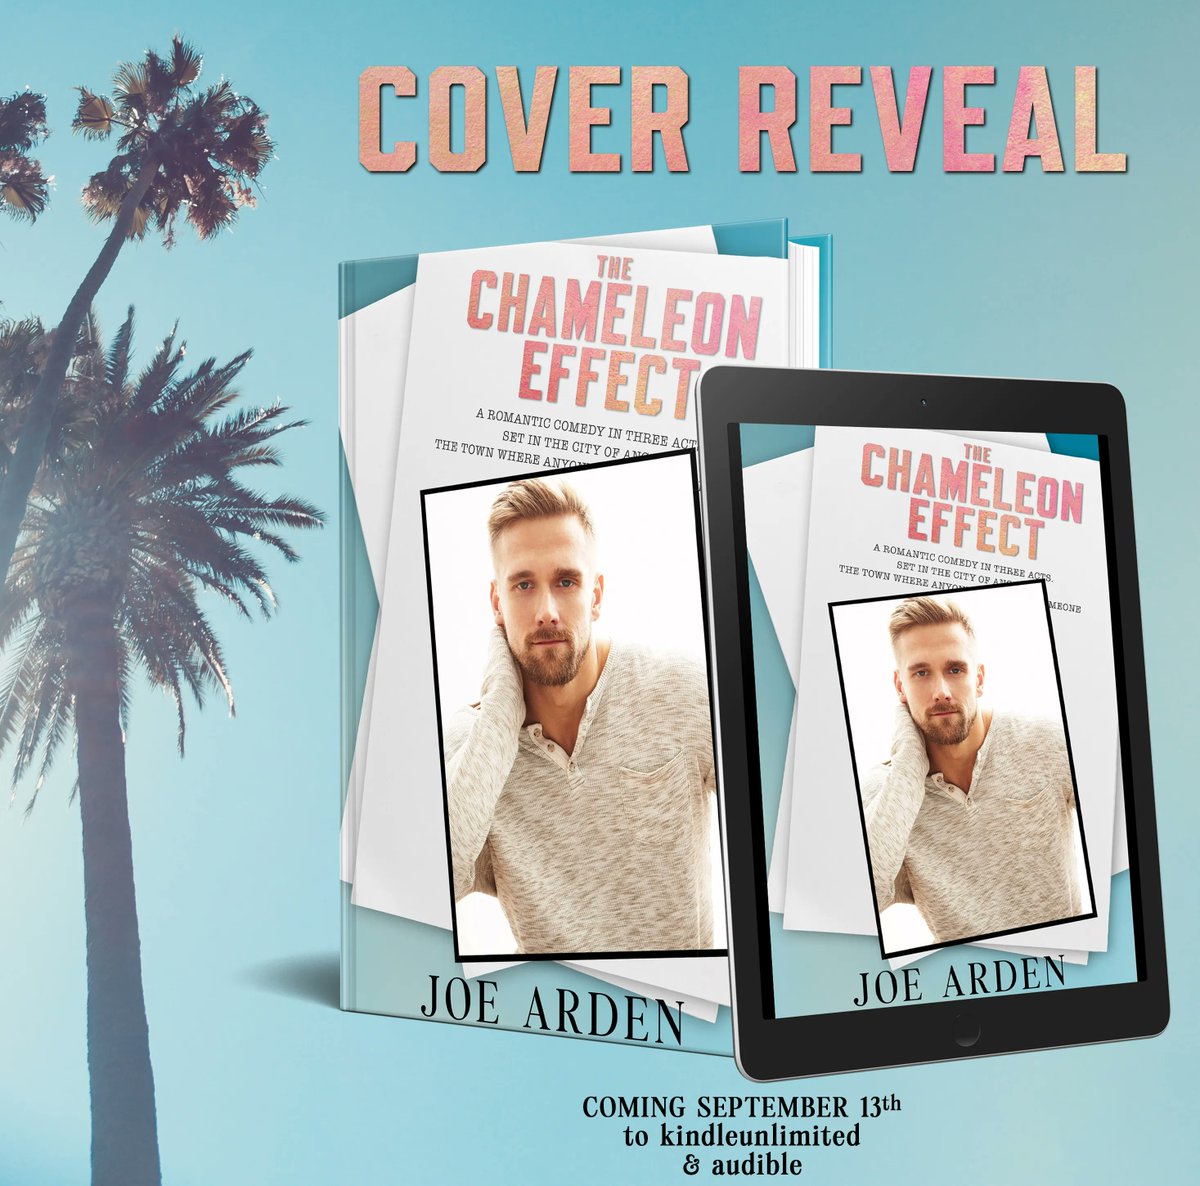 🎬★COVER REVEAL★🎬 𝐓𝐡𝐞 𝐂𝐡𝐚𝐦𝐞𝐥𝐞𝐨𝐧 𝐄𝐟𝐟𝐞𝐜𝐭 is the debut solo novel from acclaimed, award-winning romance narrator, @TheRealJoeArden, coming September 13th. A secret identity romance from the man with the secret identity! Pre-order here: buff.ly/3p8AIBV